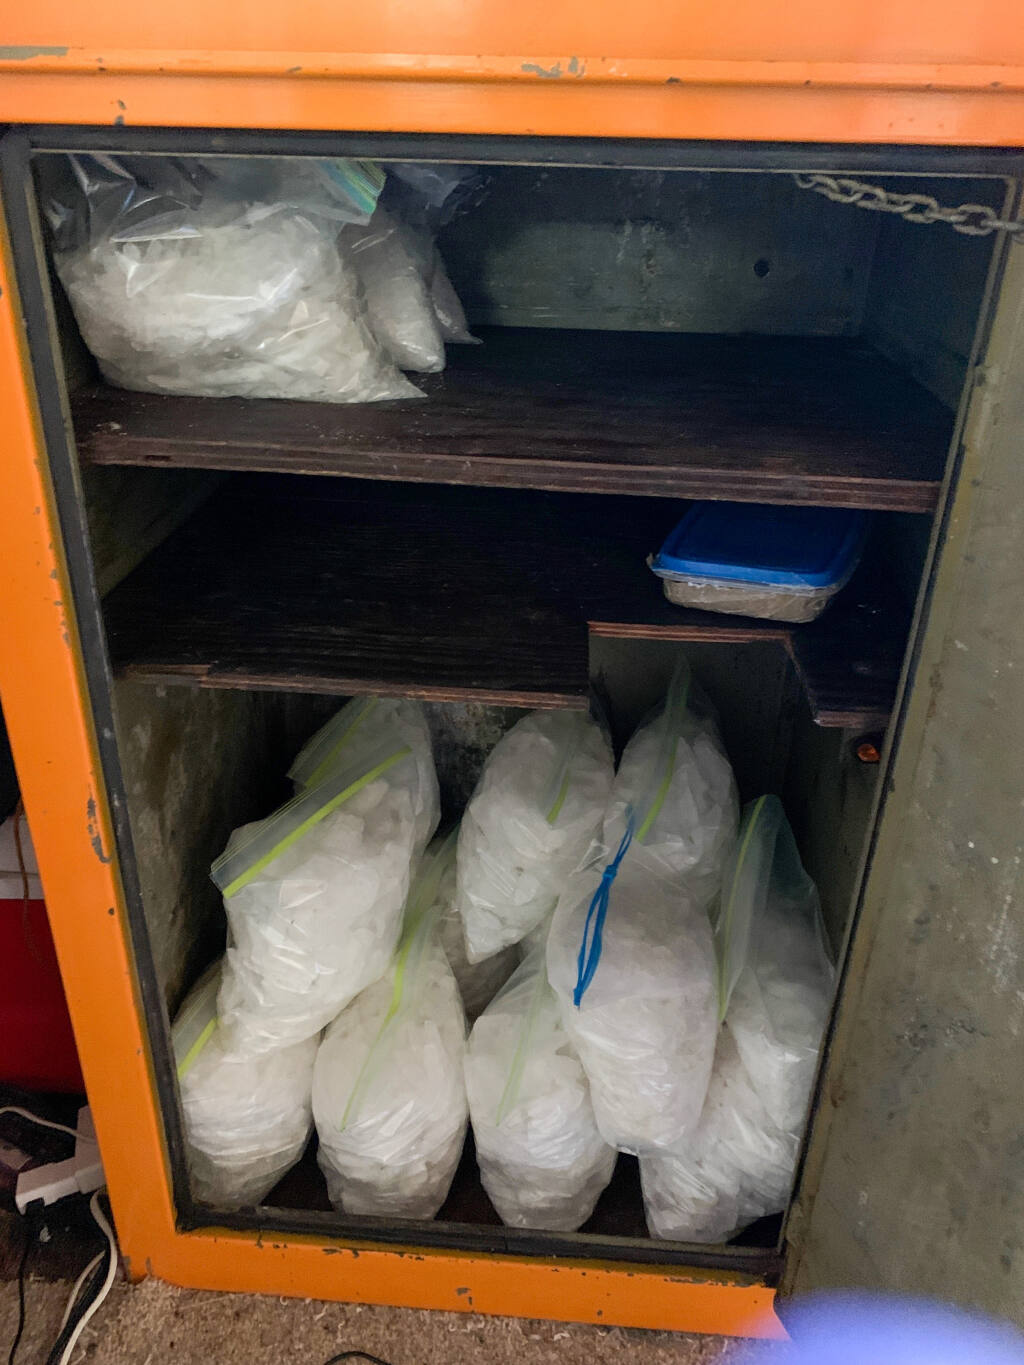 A Santa Rosa man was arrested Monday, Feb. 22, 2021,  after police found about 70 pounds of suspected methamphetamine in a large safe at his home. (Santa Rosa Police Department)